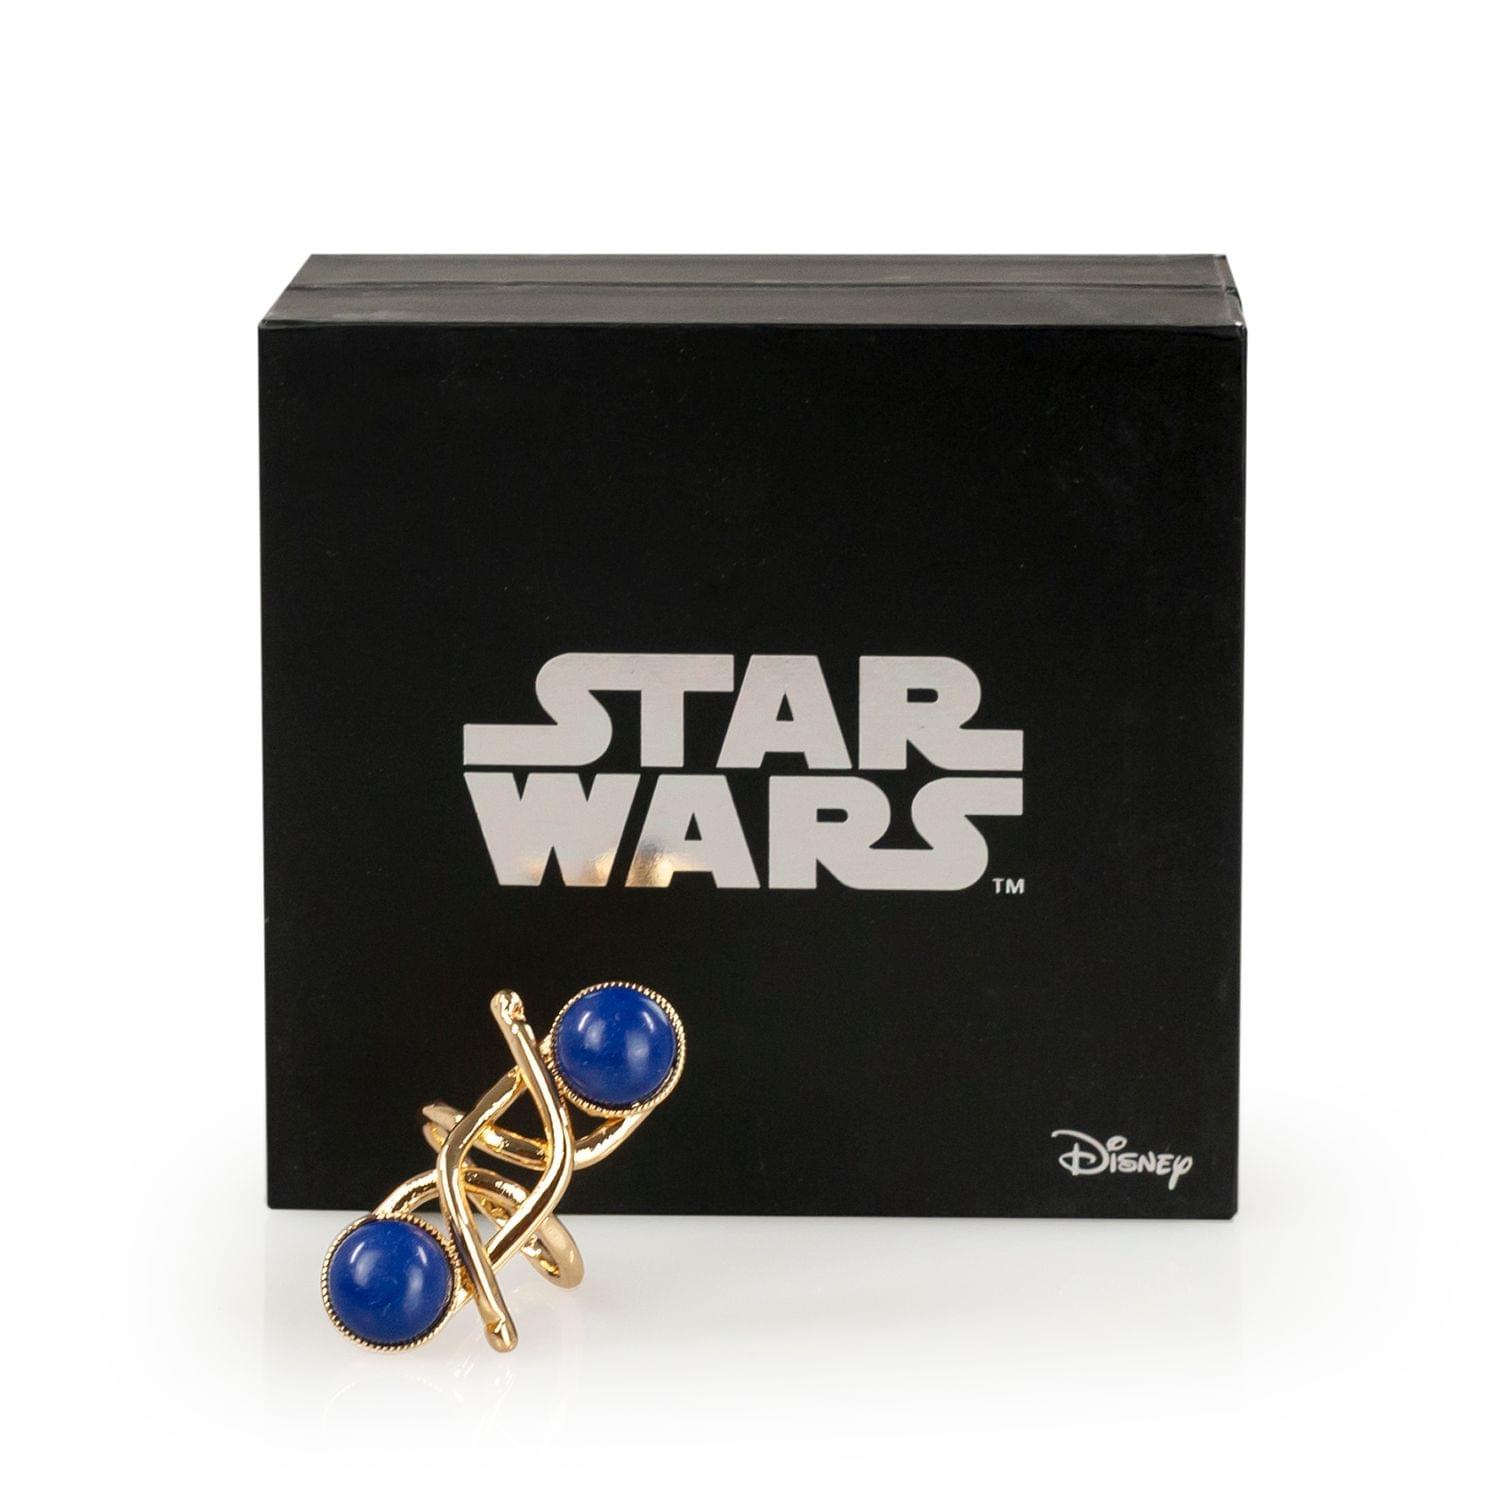 Star Wars Collectibles| General Leia Organa Adjustable Replica Ring